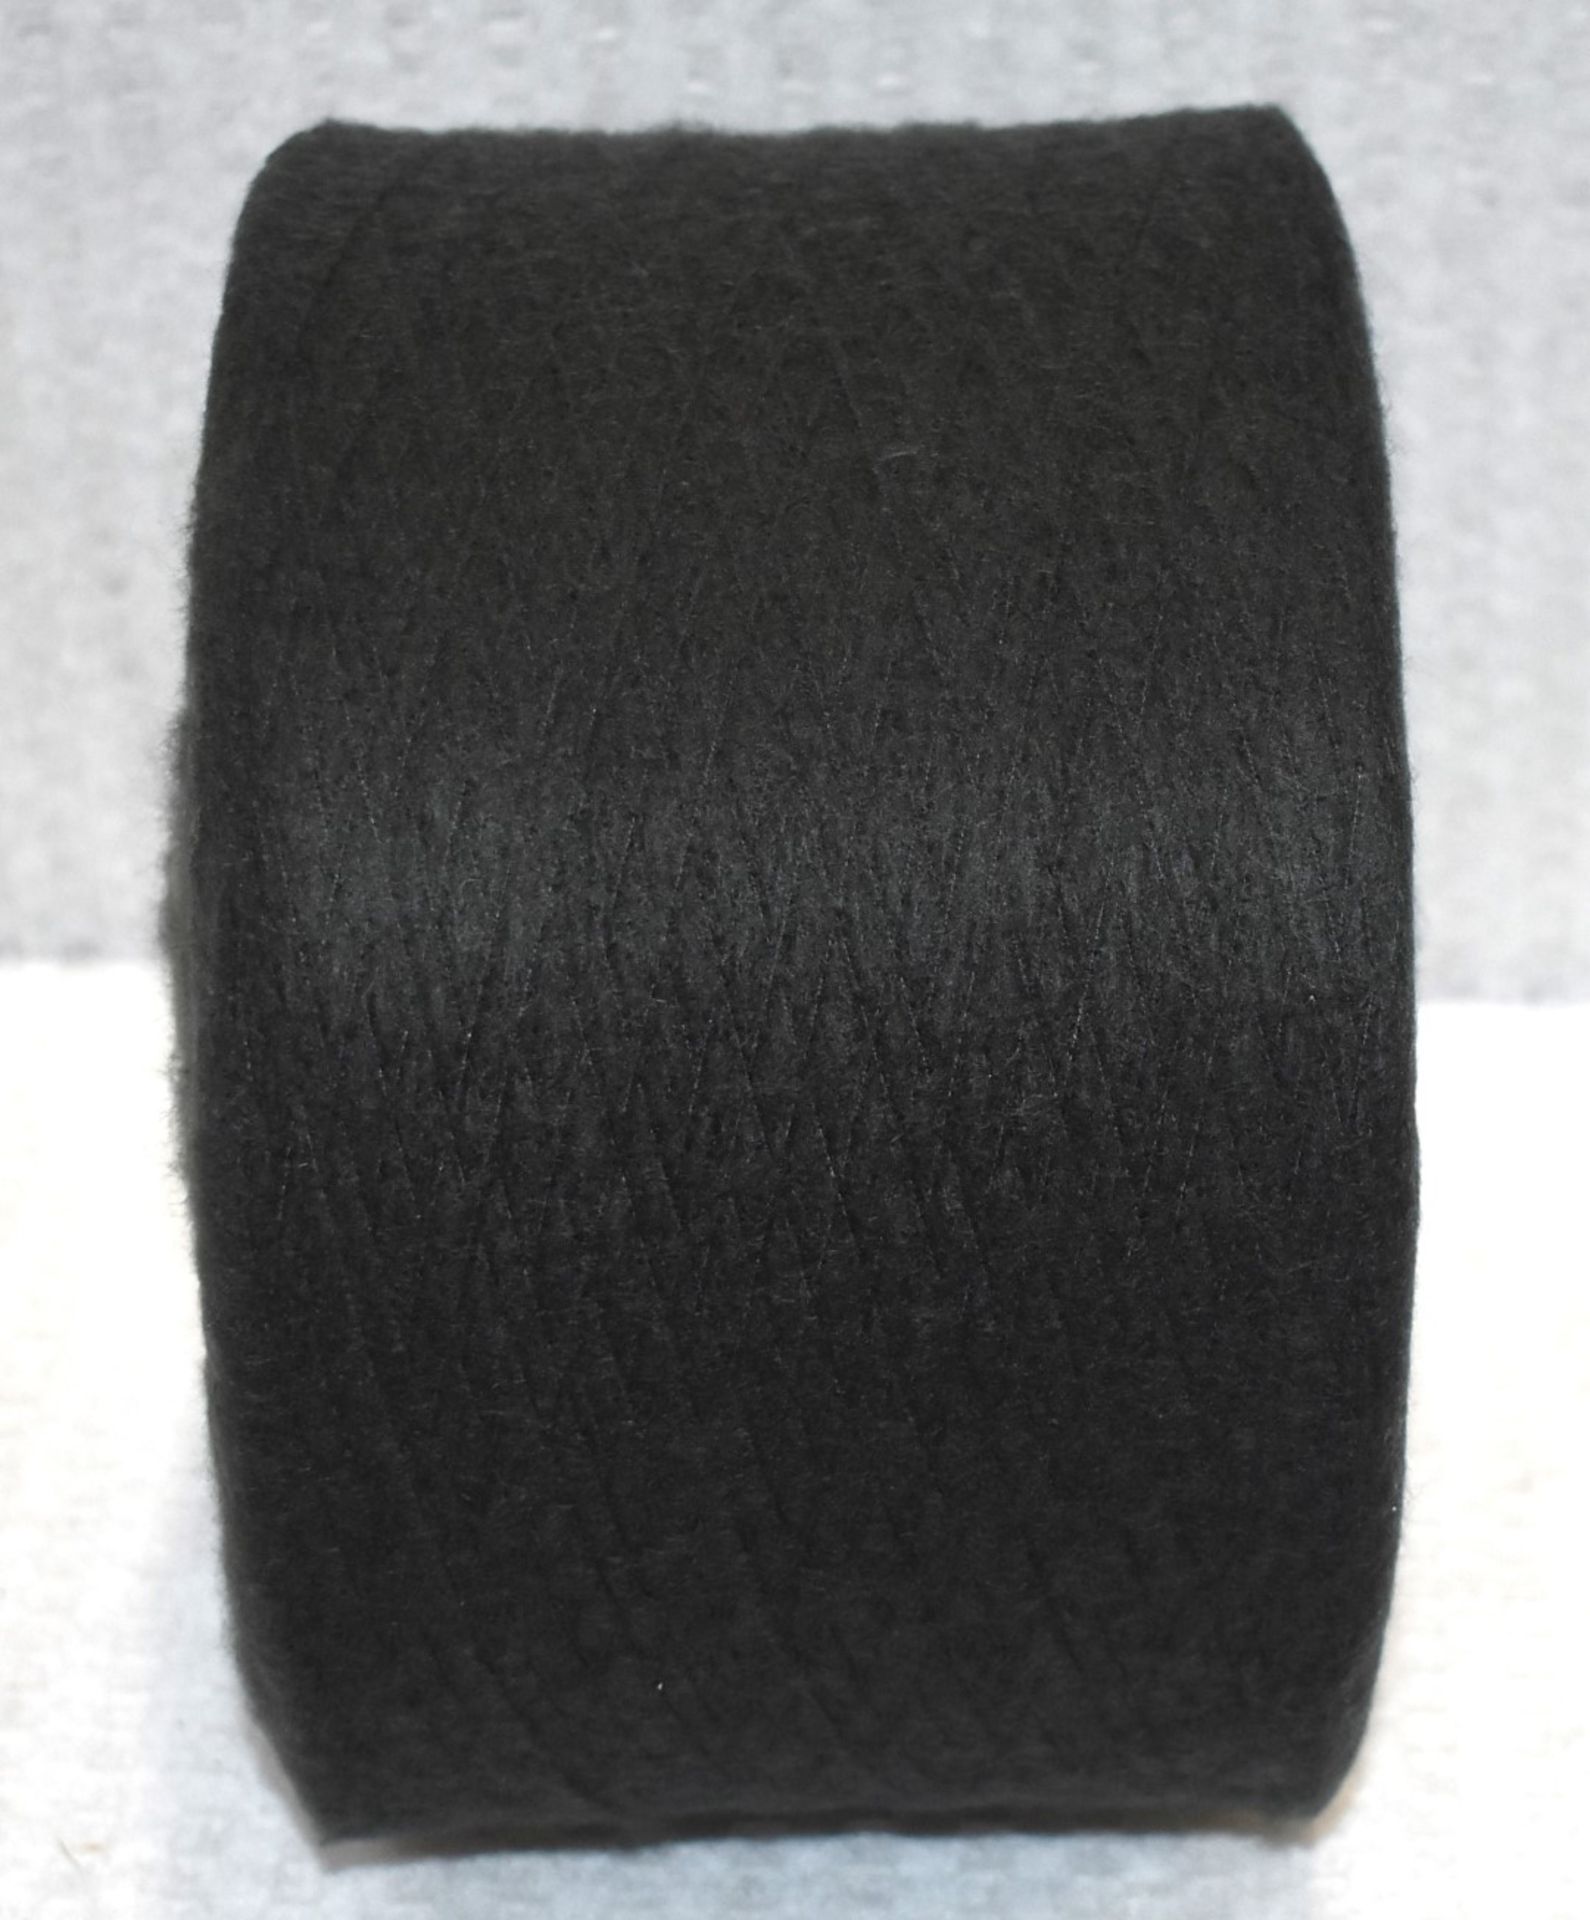 6 x Cones of 1/7,5 Lagona Knitting Yarn - Charcoal - Approx Weight: 2,300g - New Stock ABL Yarn - Image 9 of 11